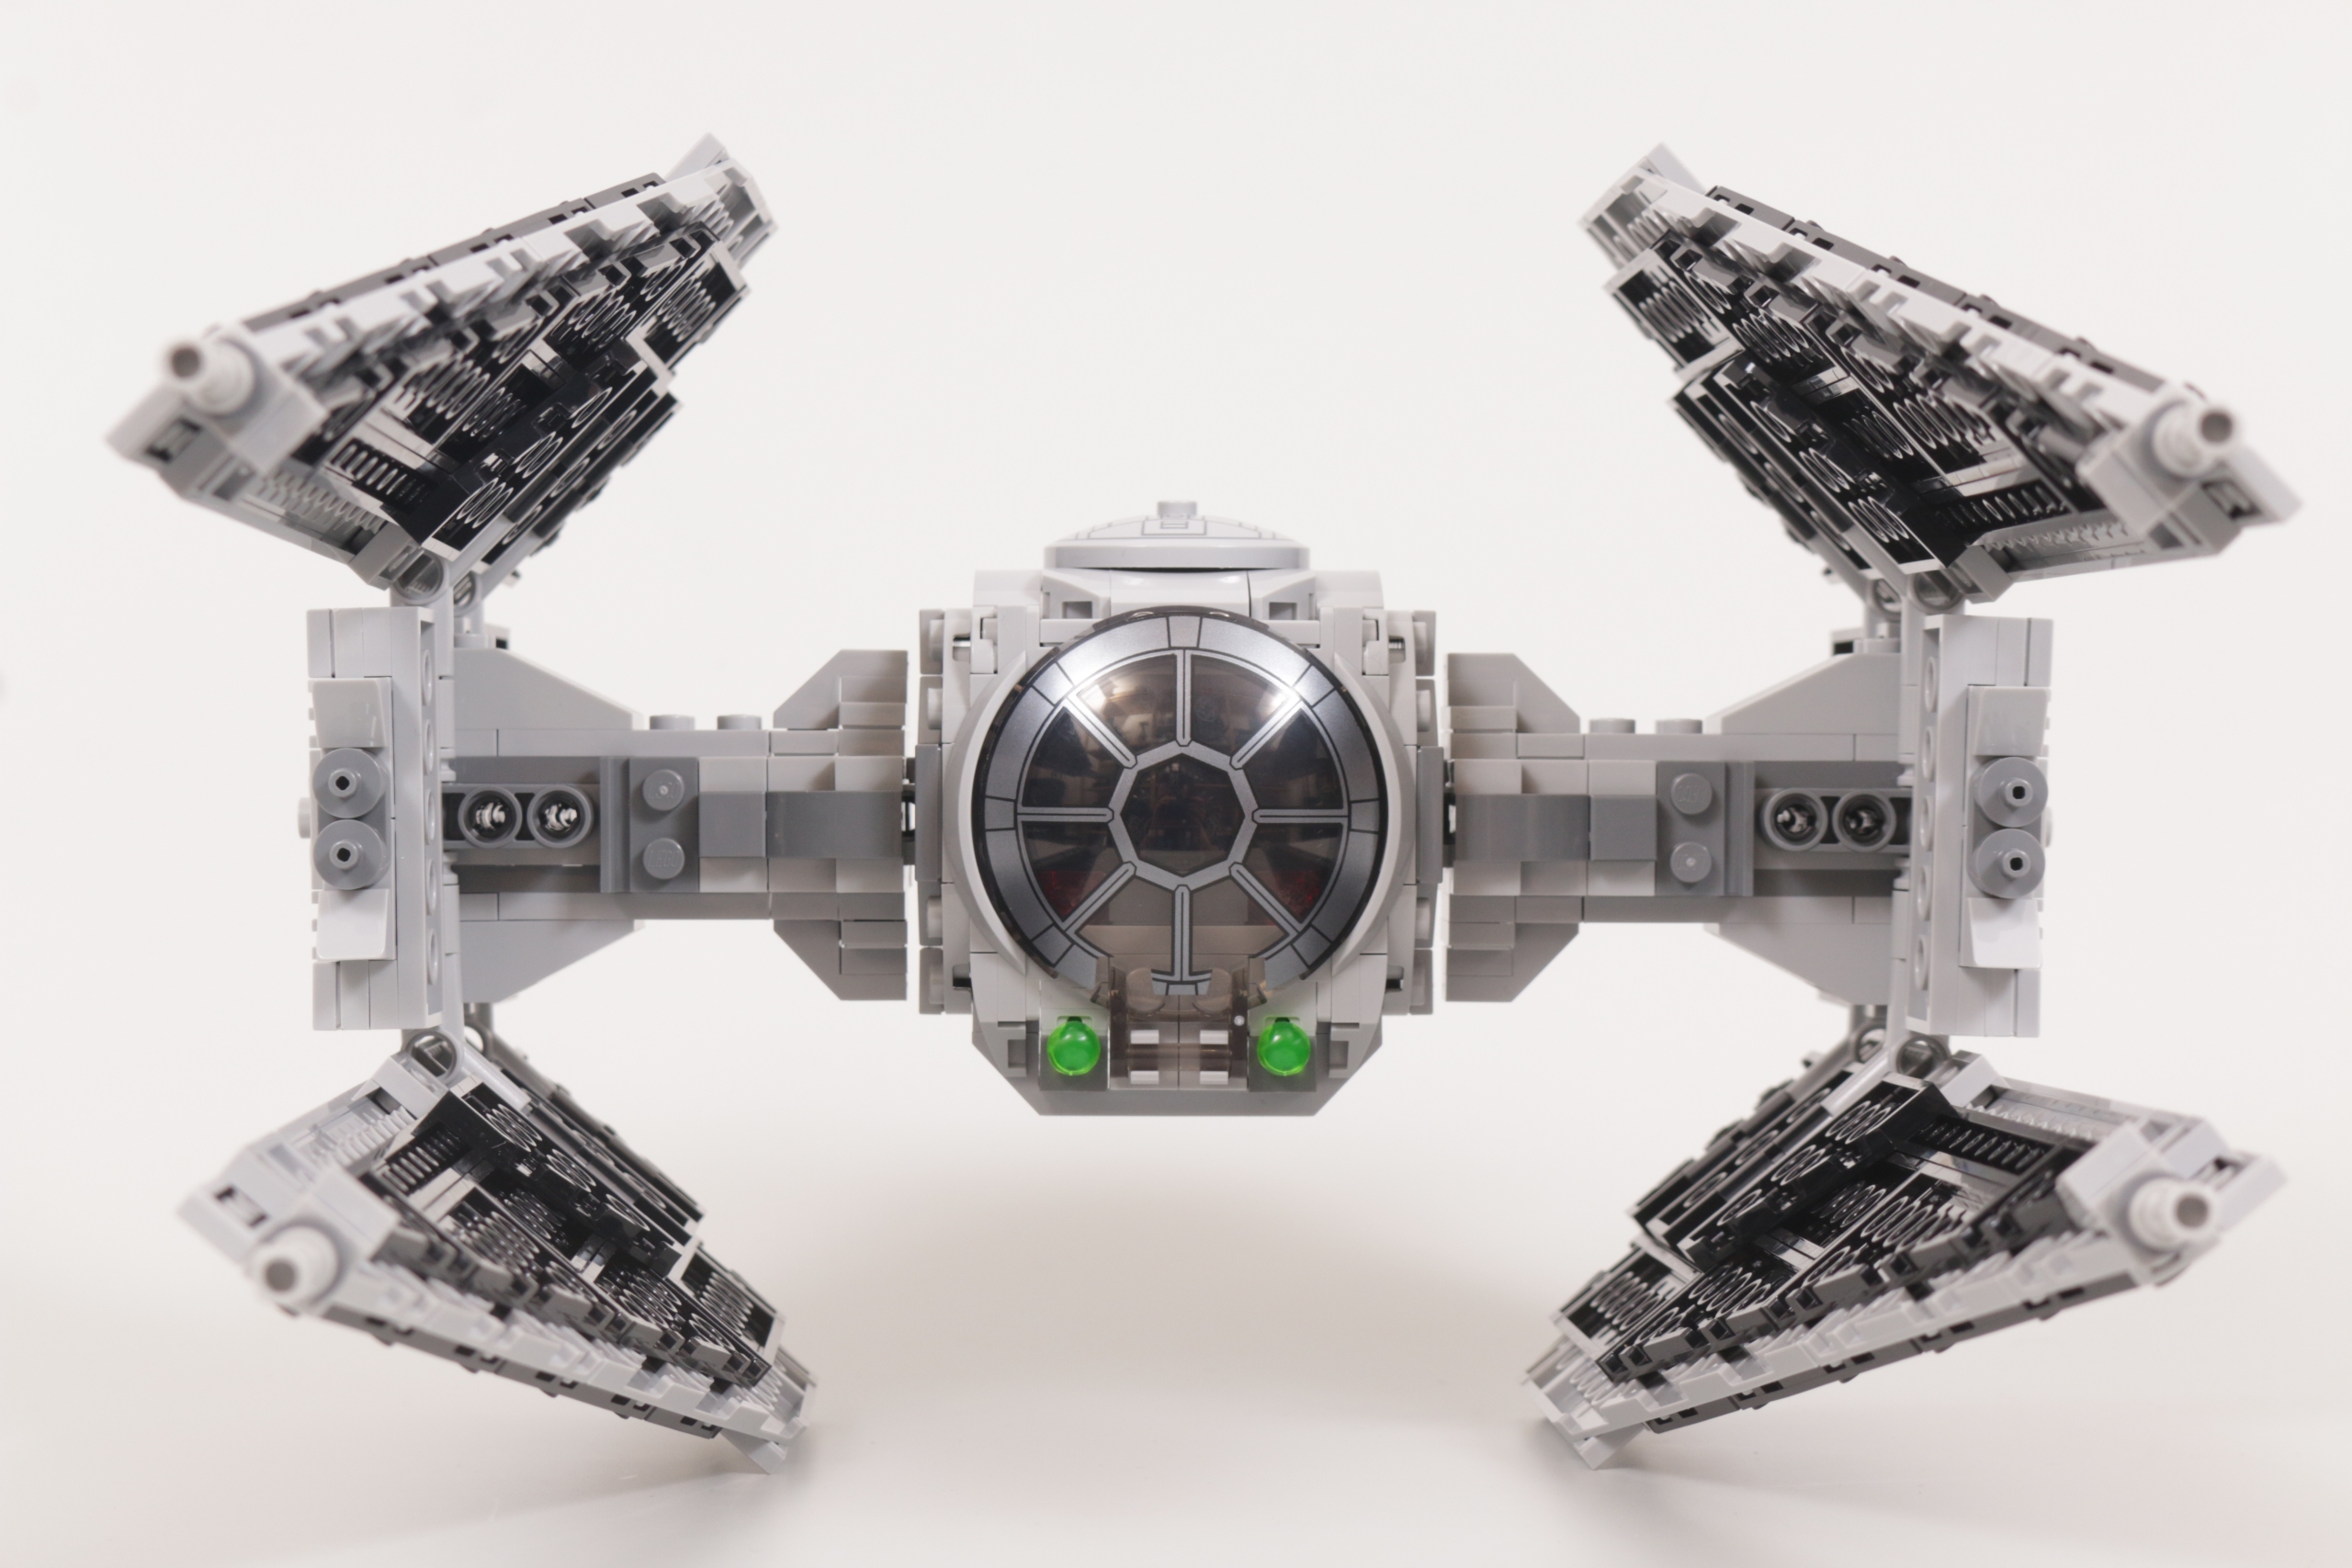 LEGO Star Wars 75348 Mandalorian Fang Fighter vs. TIE Interceptor review 18 scaled